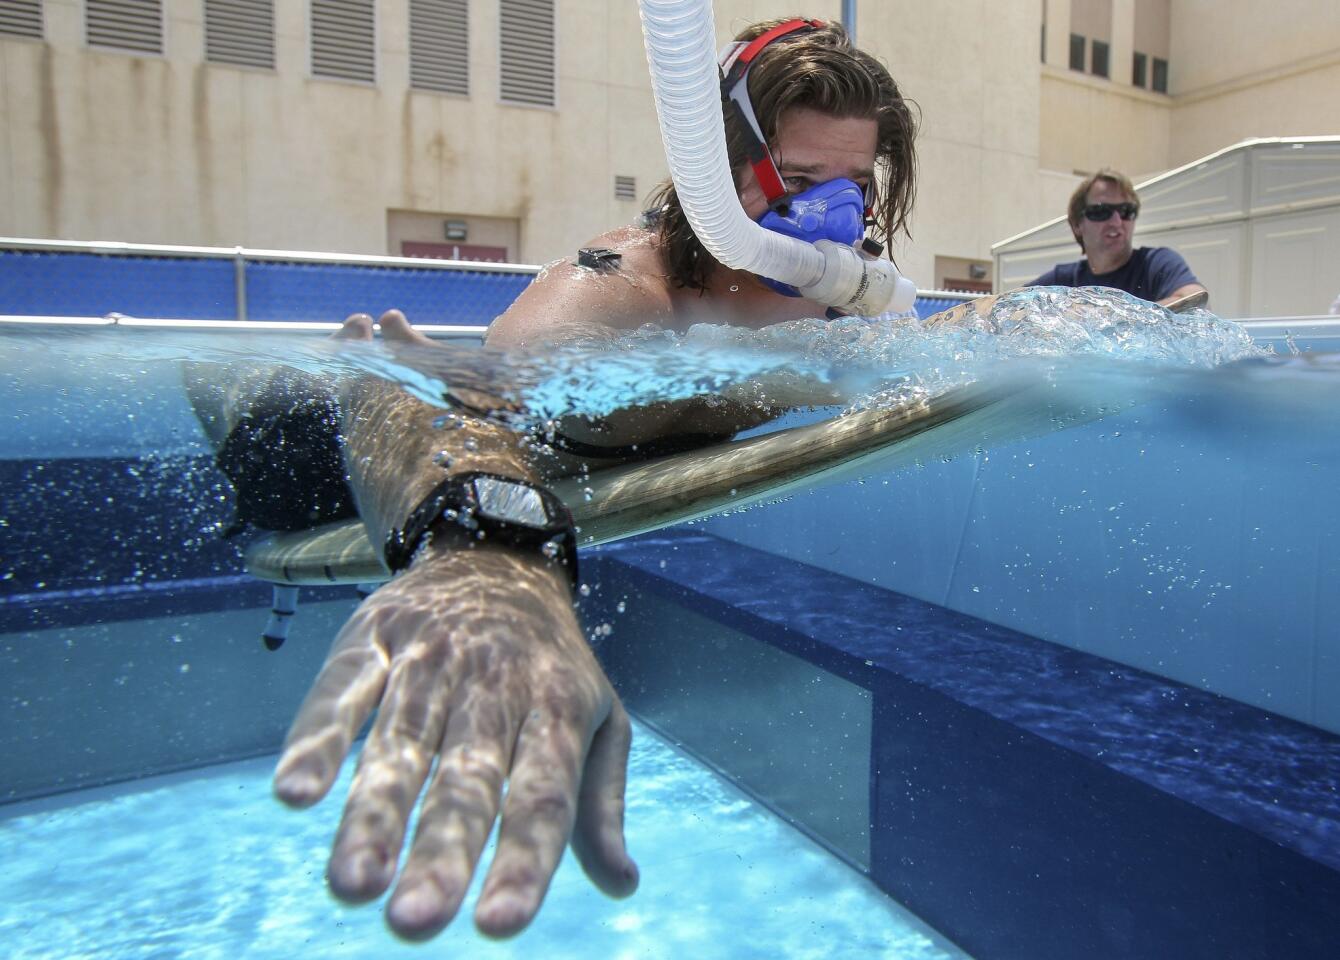 While wearing a mask, to measure oxygen consumption, kinesiology student Cody Cuchna, 24, paddles a surfboard against the current created in a swim flume as Assistant Professor Sean Newcomer watches.